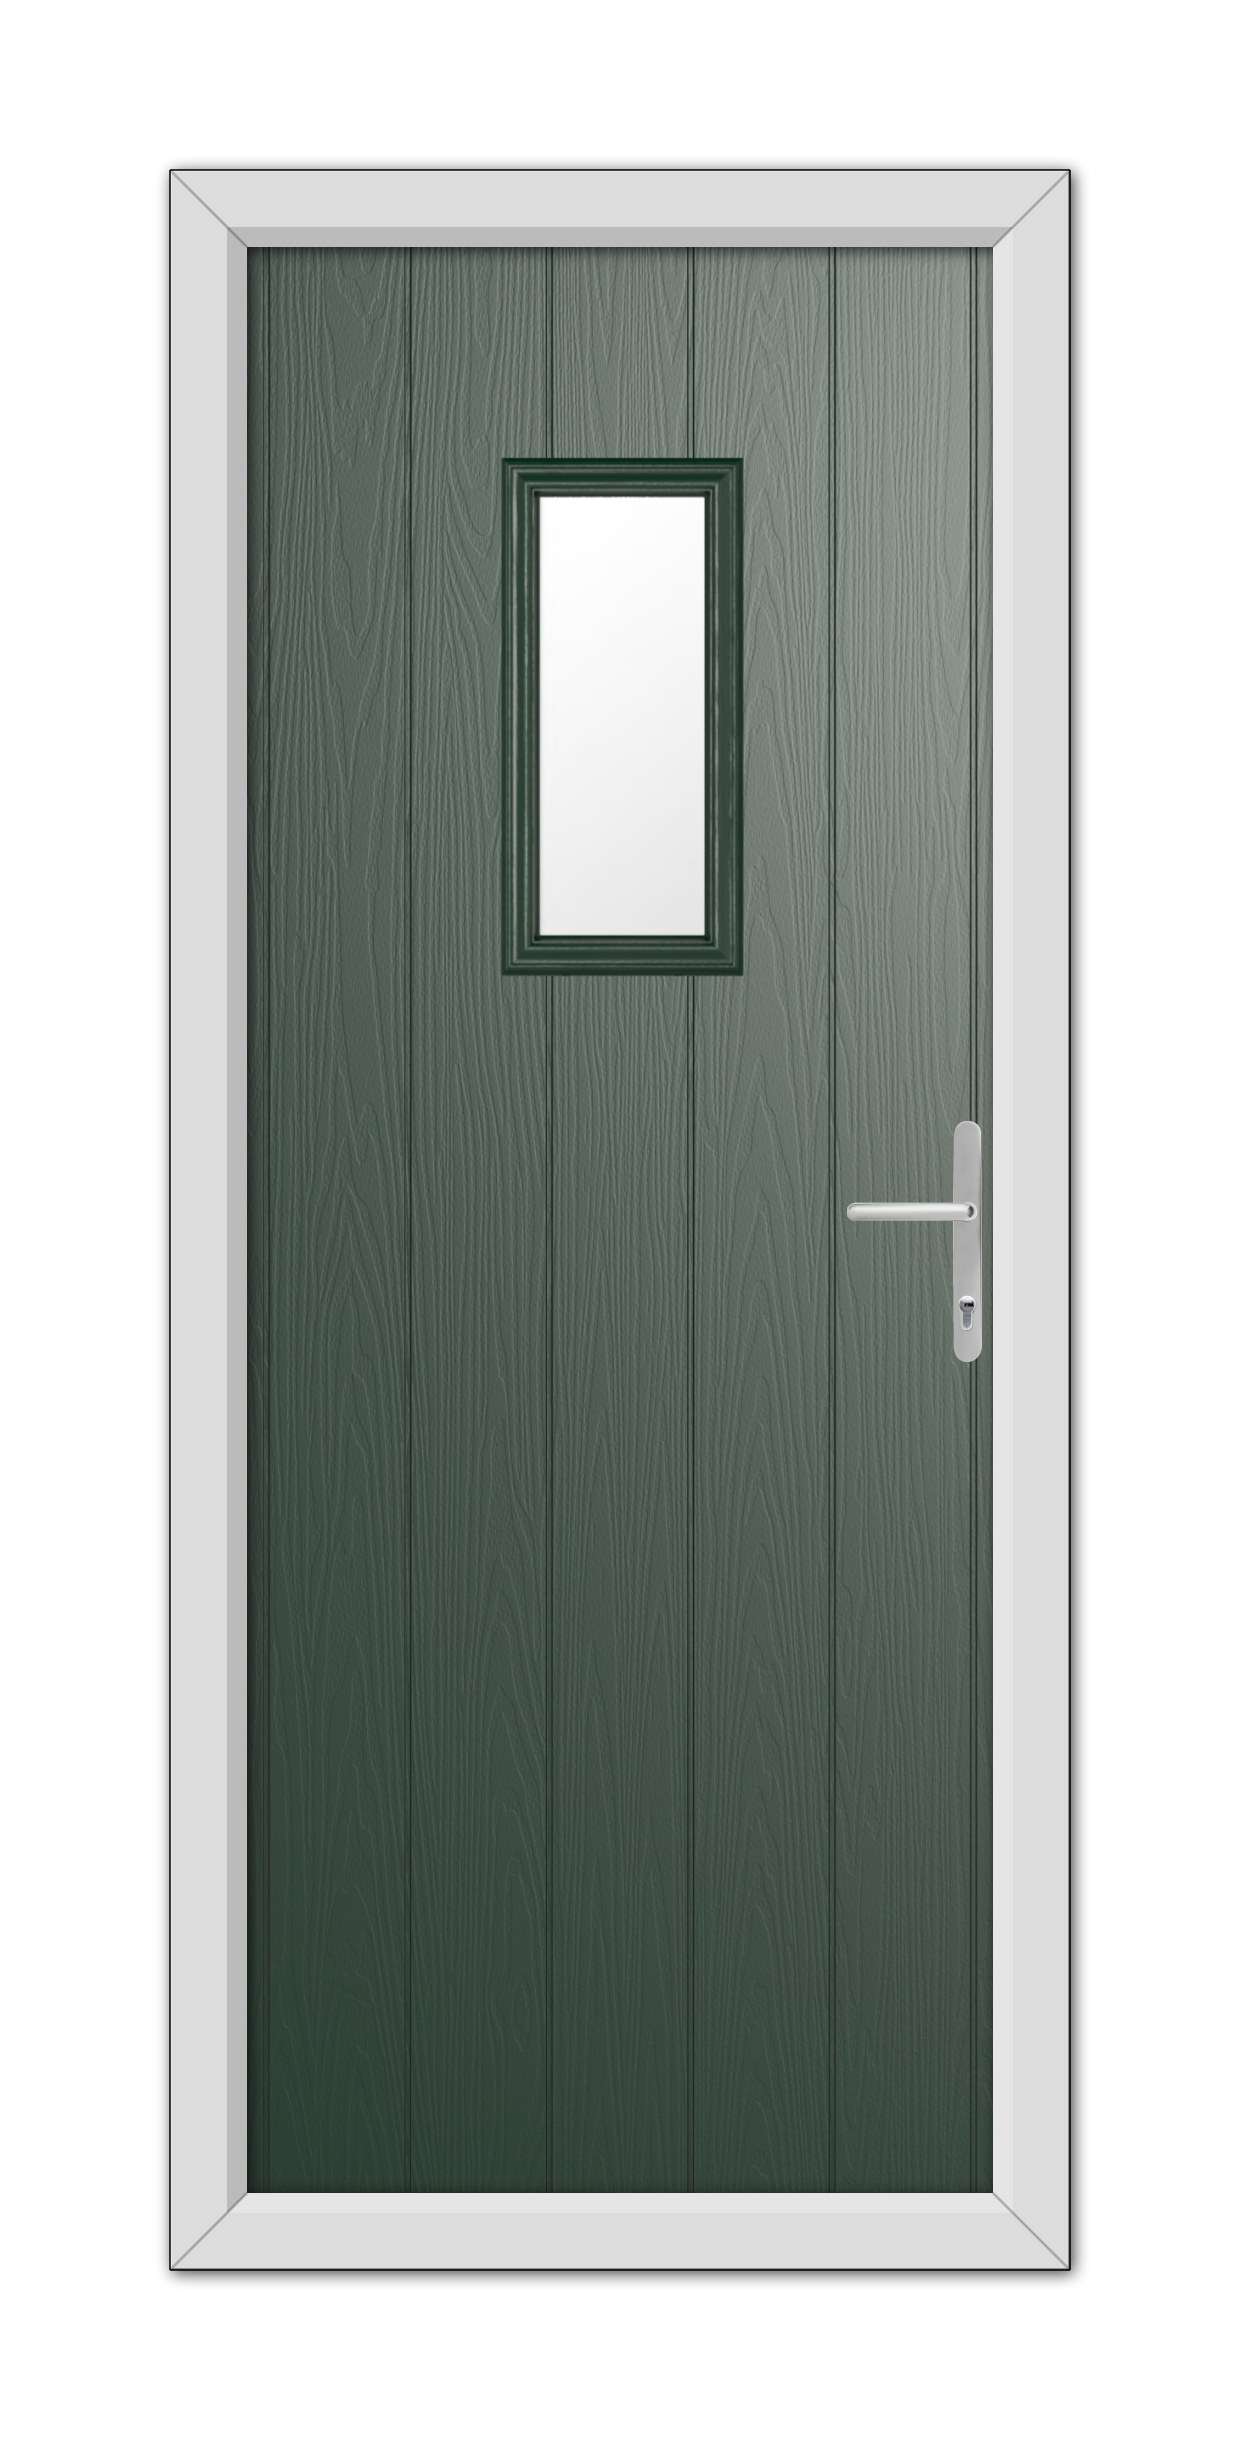 A Green Somerset Composite Door 48mm Timber Core with a square window and white handle, set within a white door frame, viewed head-on.